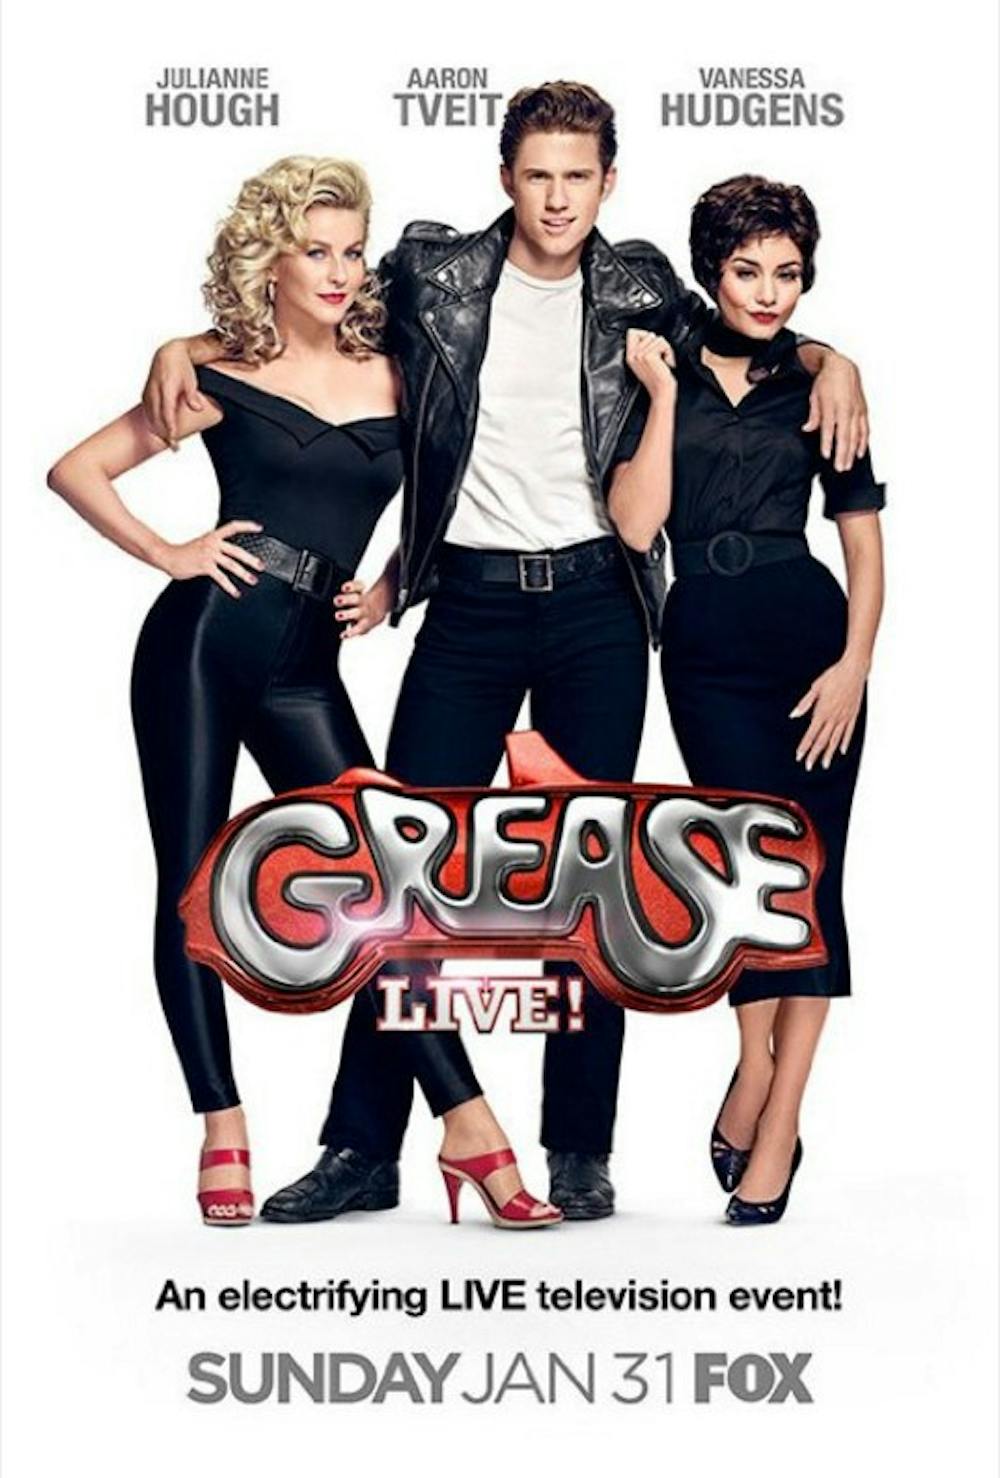 "Grease: Live" fell short of the iconic original film but should be commended for excellent cast performances.